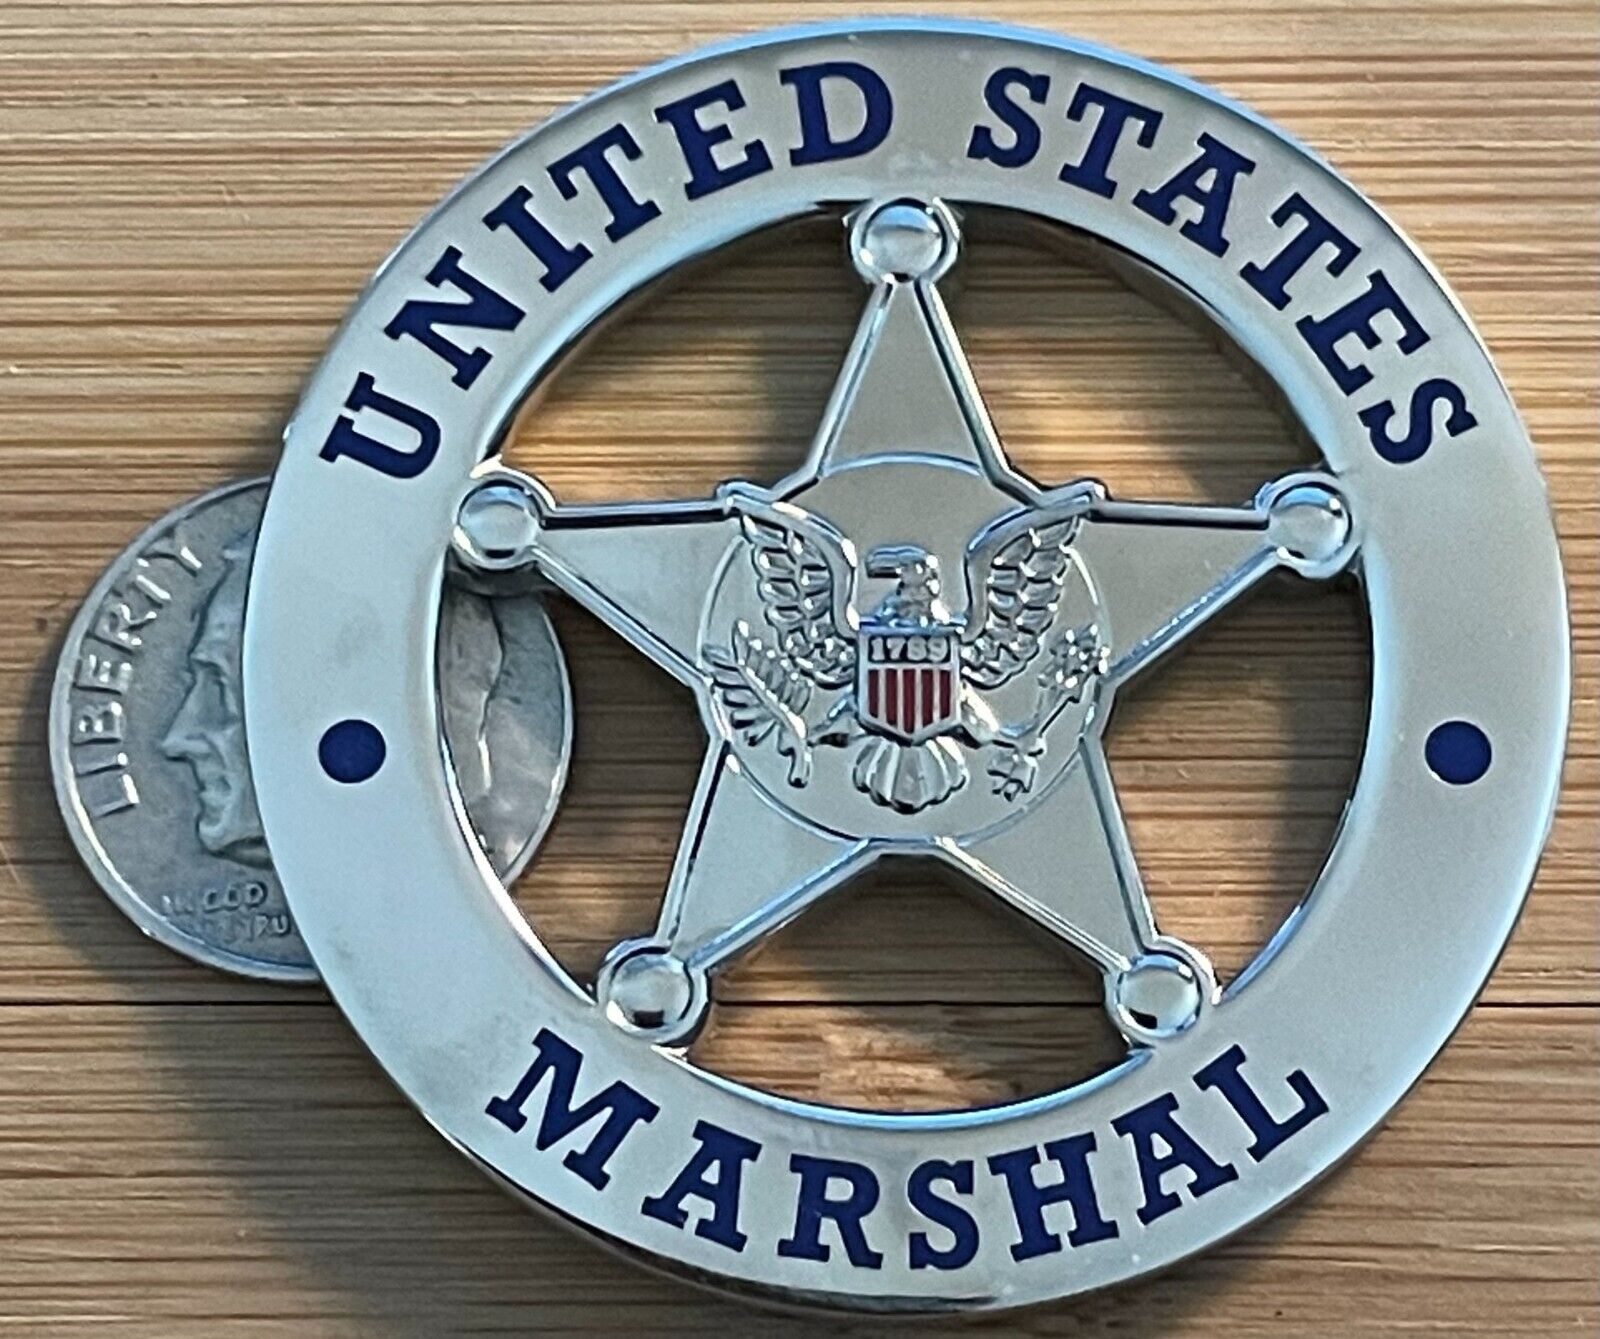 US Marshals Service - Cutout version 1.75in - SILVER version challenge coin